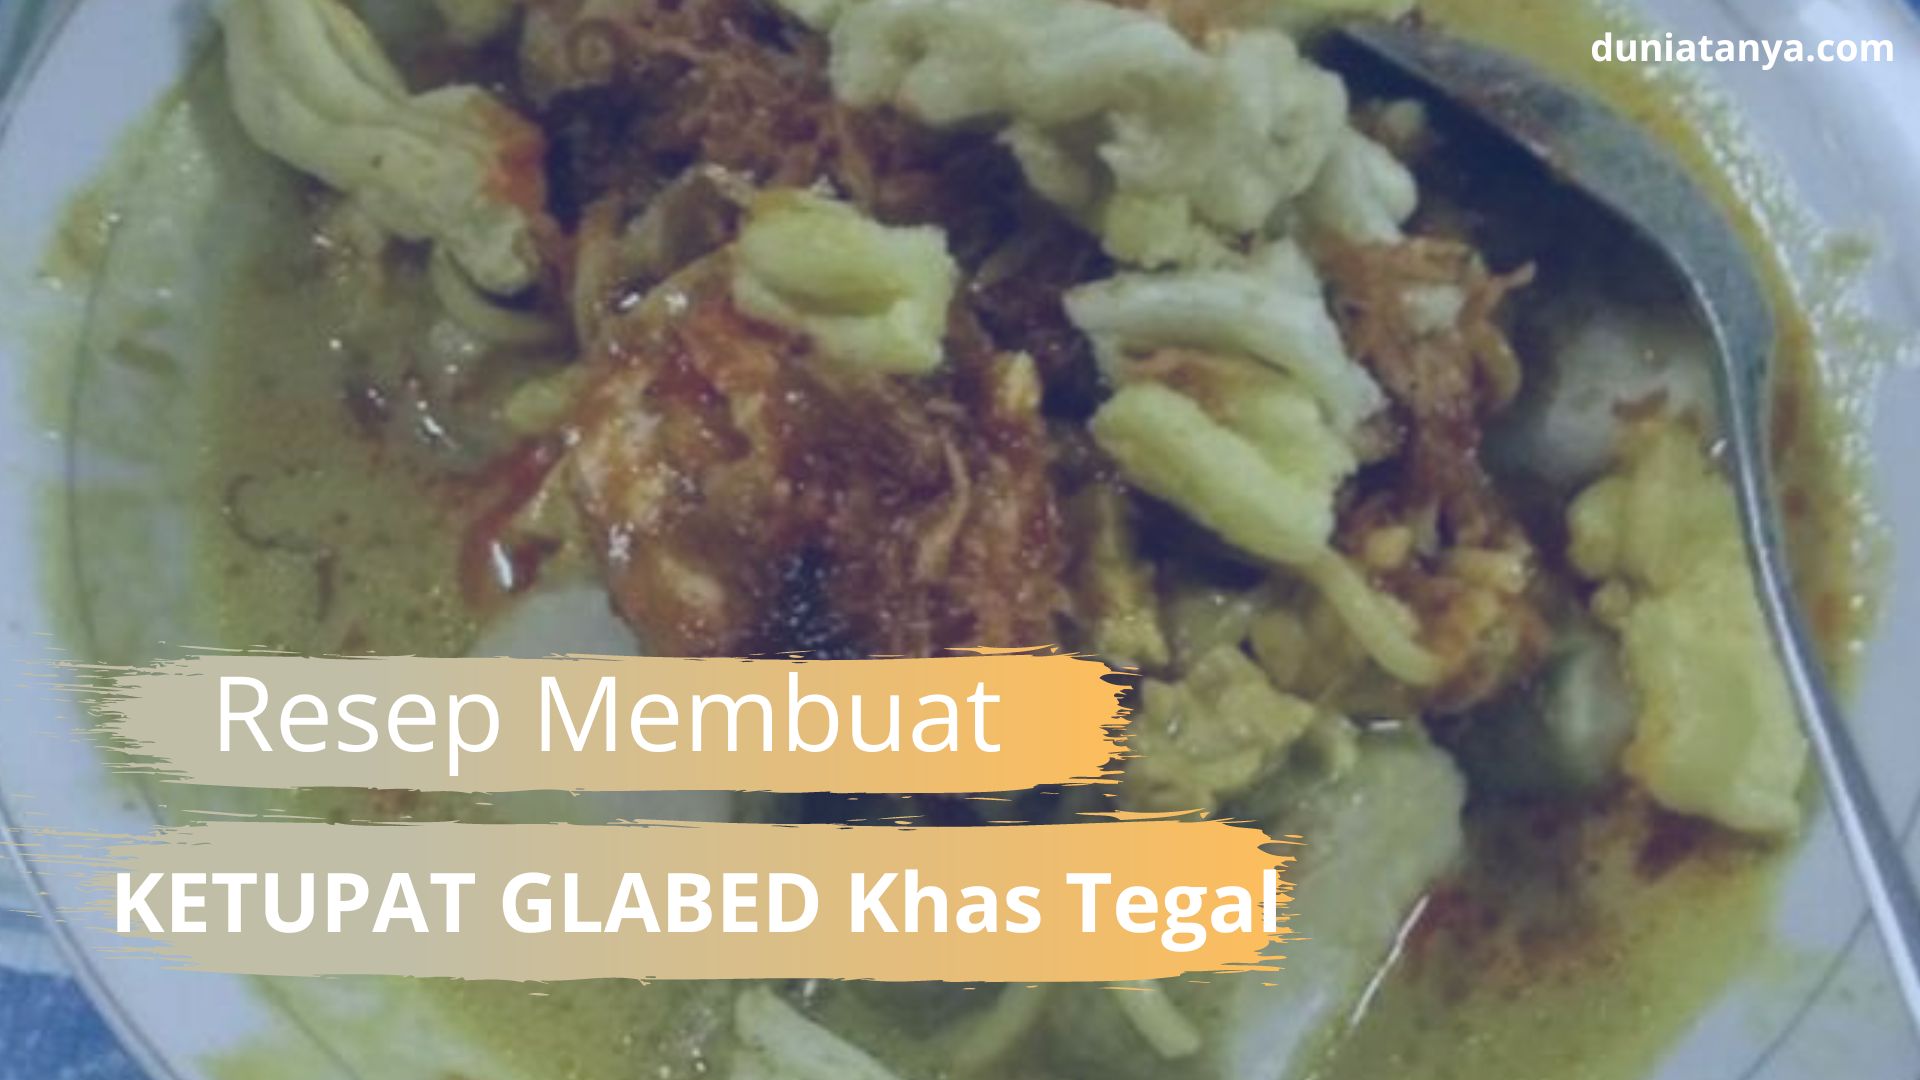 You are currently viewing Resep Membuat KETUPAT GLABED Khas Tegal